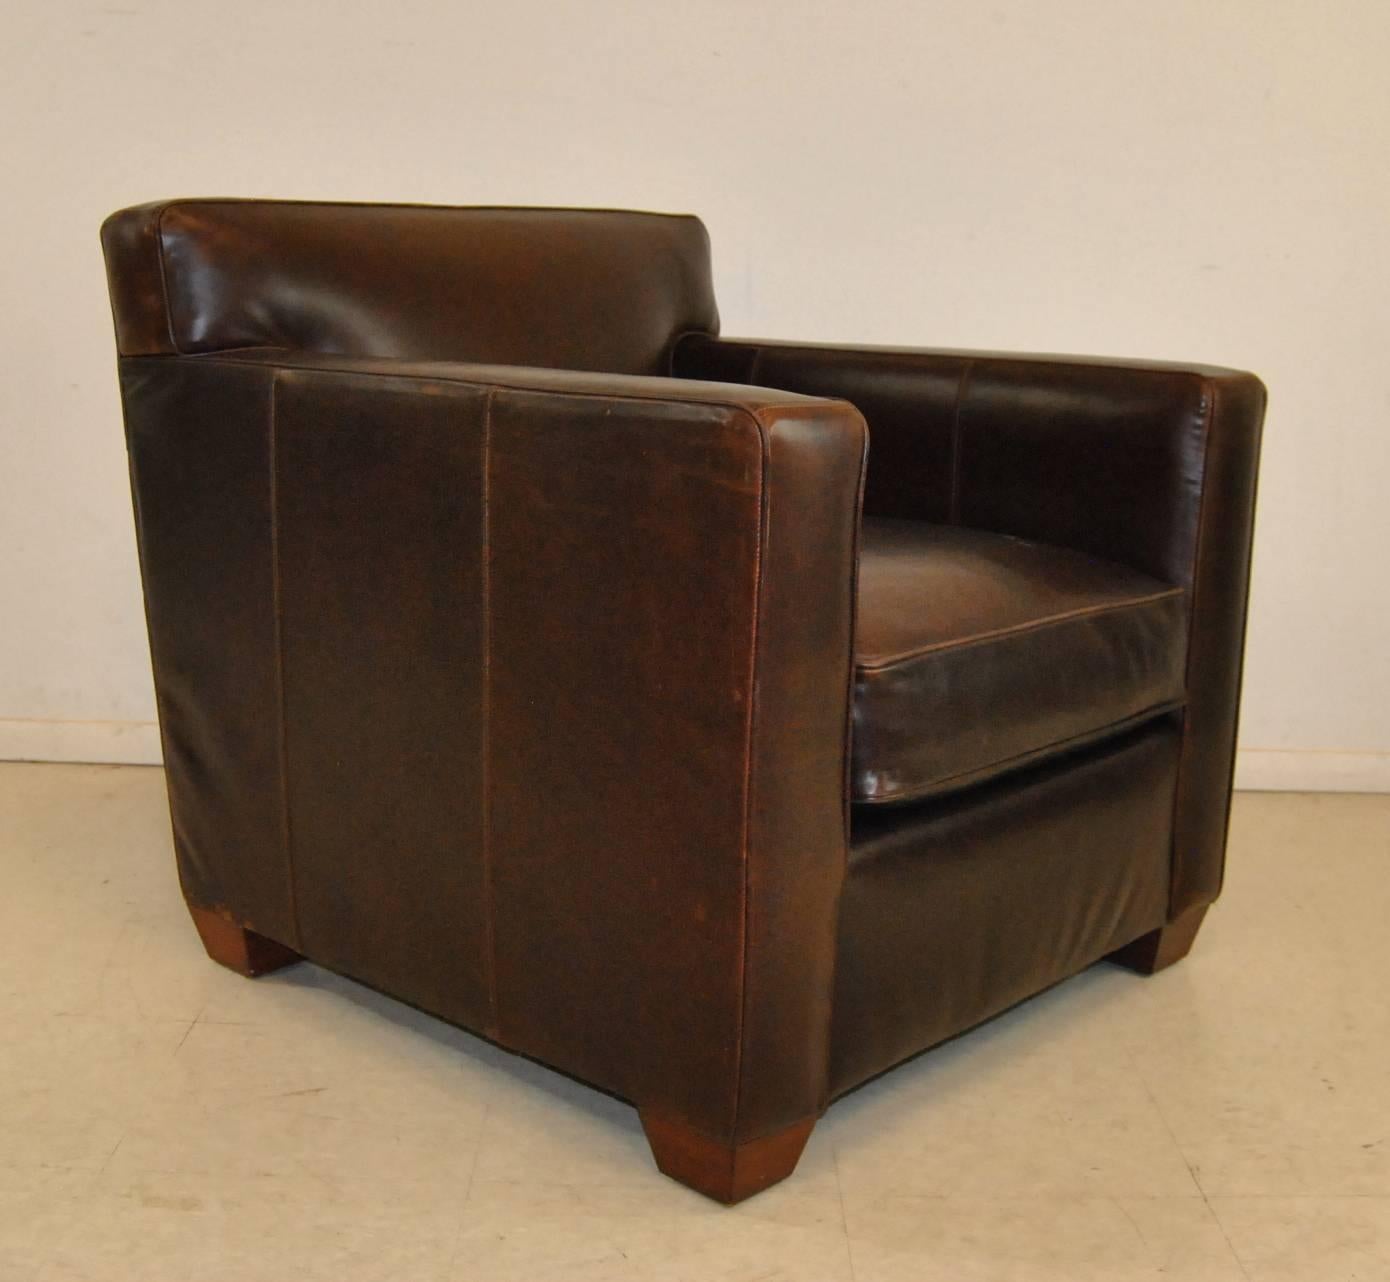 A beautiful custom ordered Ralph Lauren Graham armchair in distressed brown leather. This piece has been ordered with the fully upholstered sprung back as opposed to a cushion which comes standard. It is slightly more expensive but more durable. The